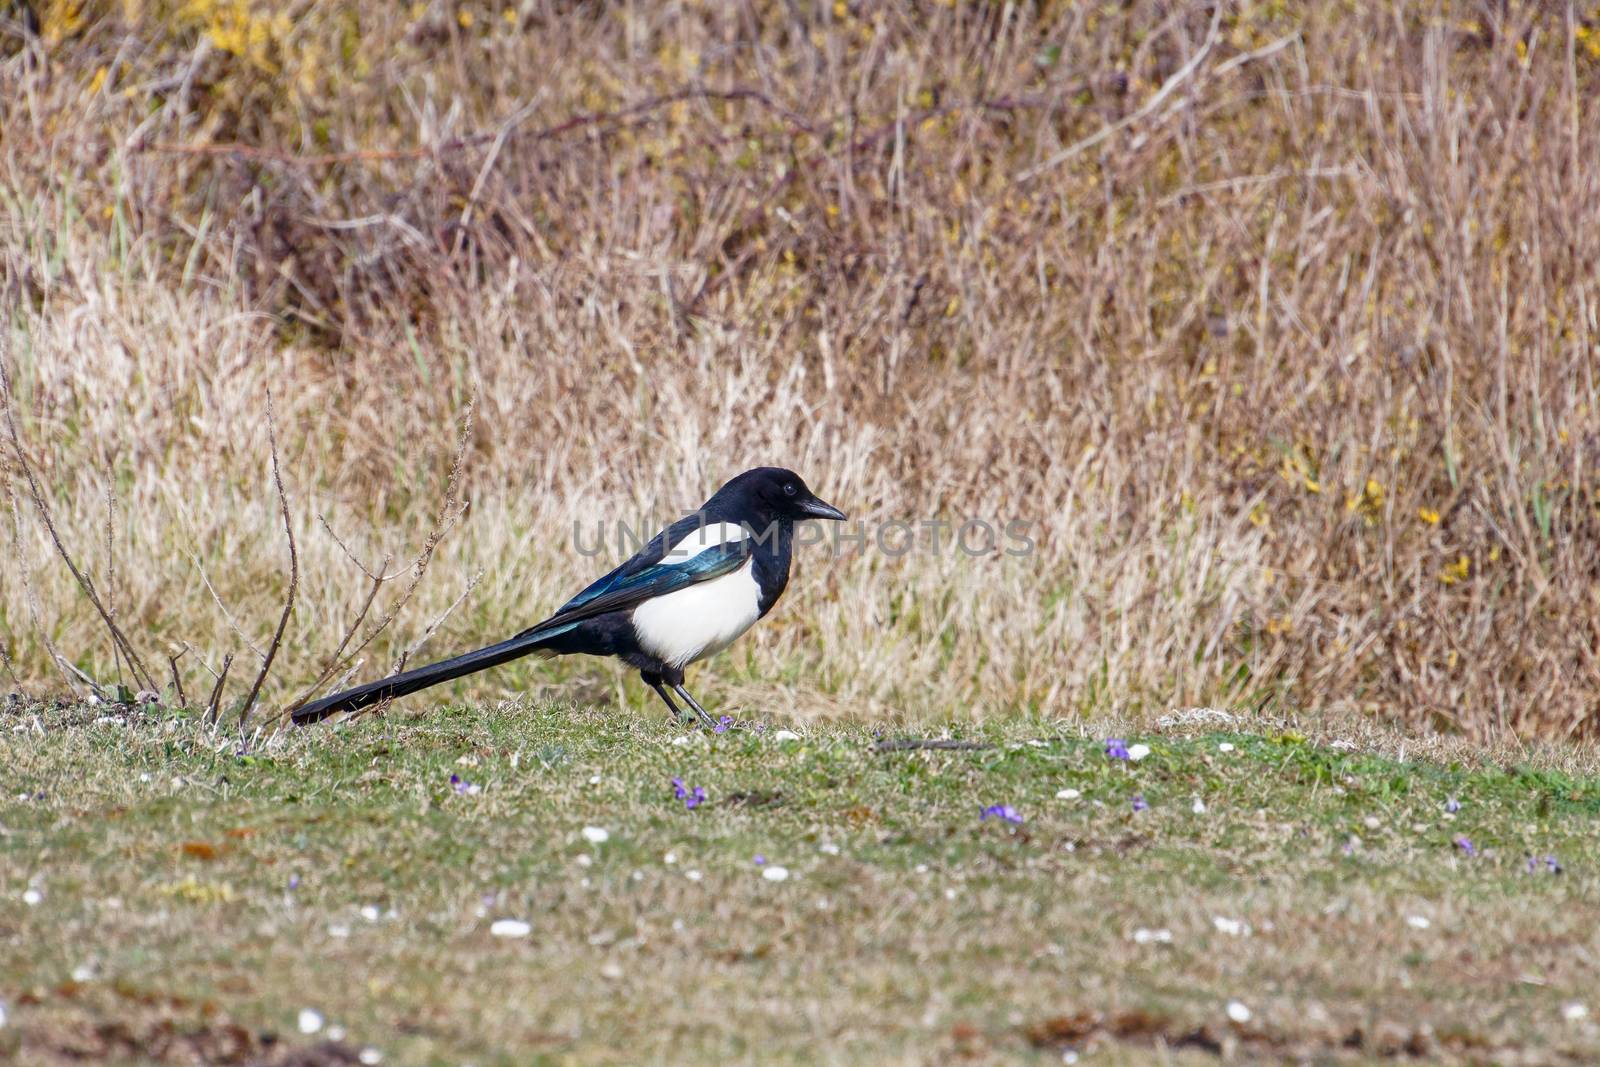 Common Magpie at Hope Gap near Seaford